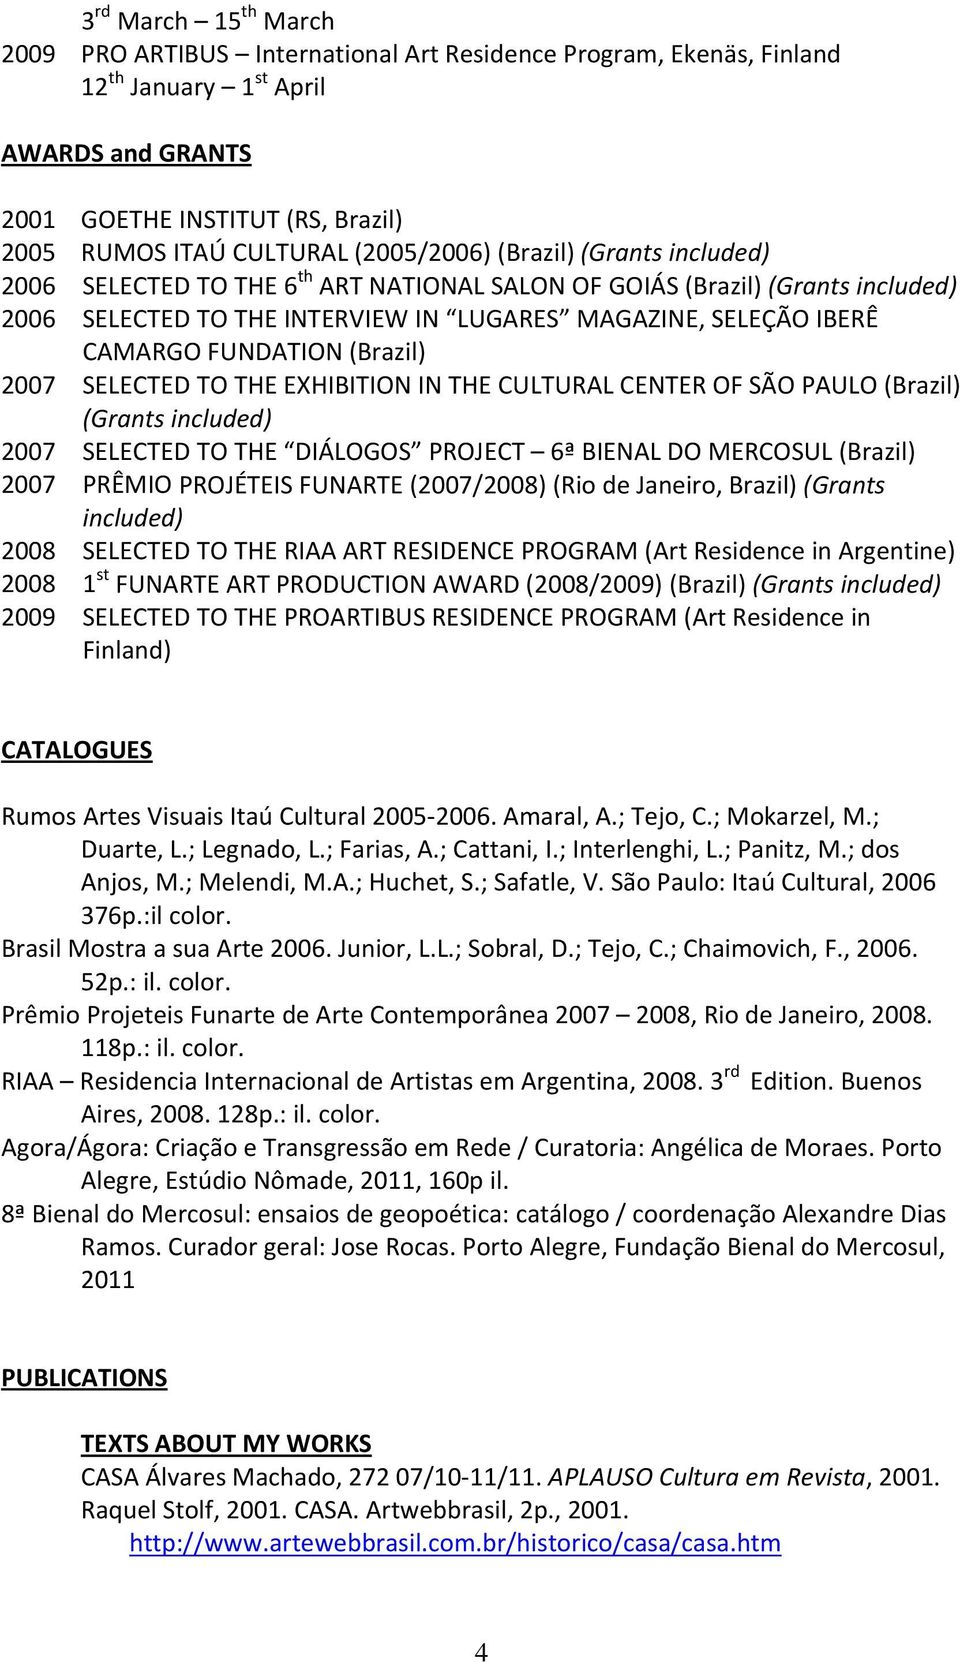 FUNDATION (Brazil) 2007 SELECTED TO THE EXHIBITION IN THE CULTURAL CENTER OF SÃO PAULO (Brazil) (Grants included) 2007 SELECTED TO THE DIÁLOGOS PROJECT 6ª BIENAL DO MERCOSUL (Brazil) 2007 PRÊMIO